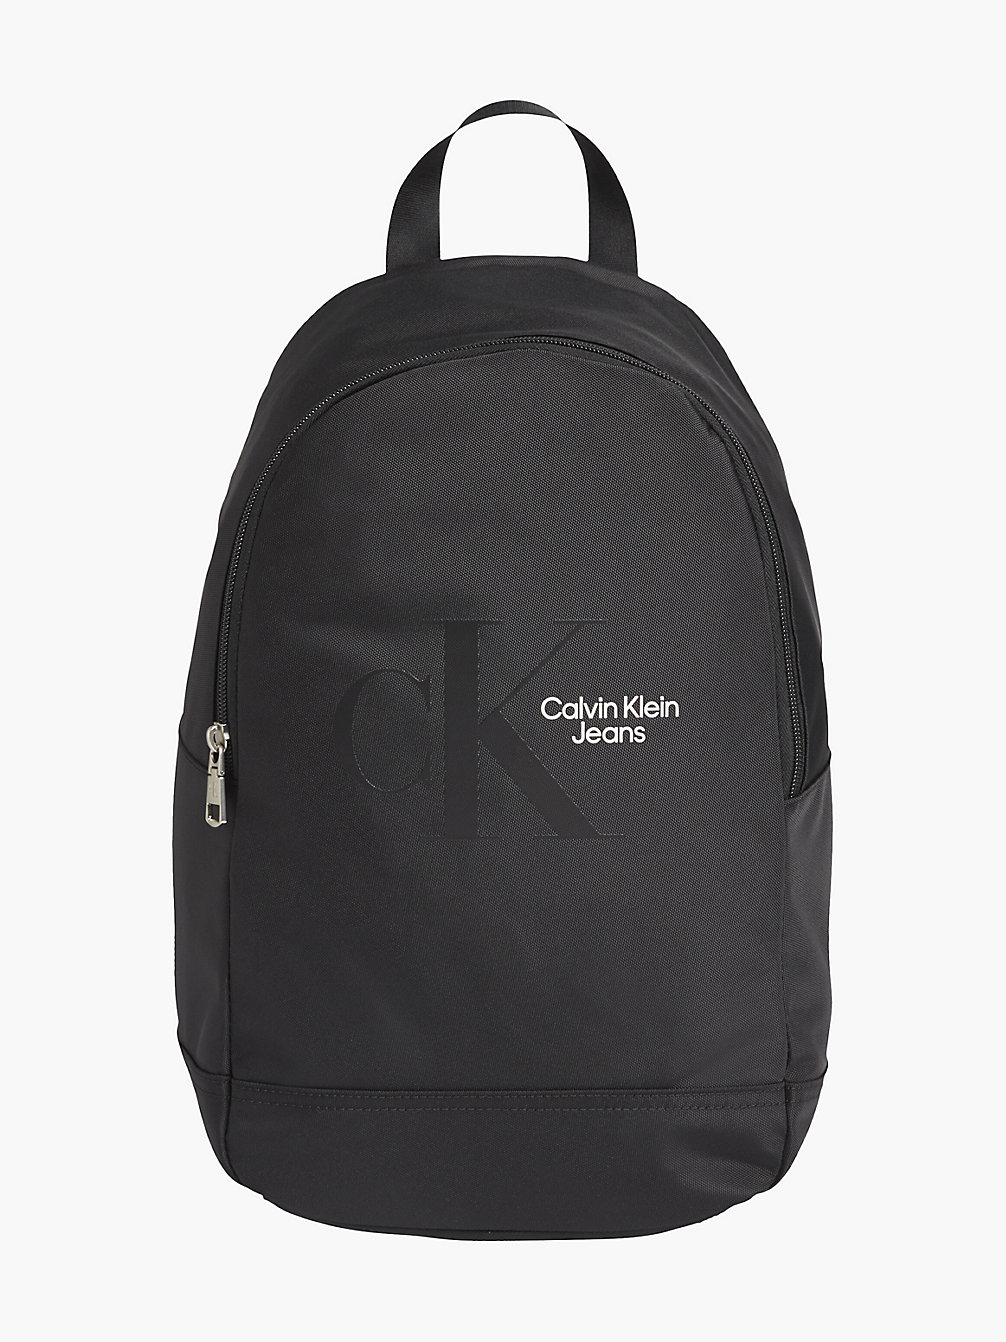 BLACK Recycled Polyester Round Backpack undefined men Calvin Klein